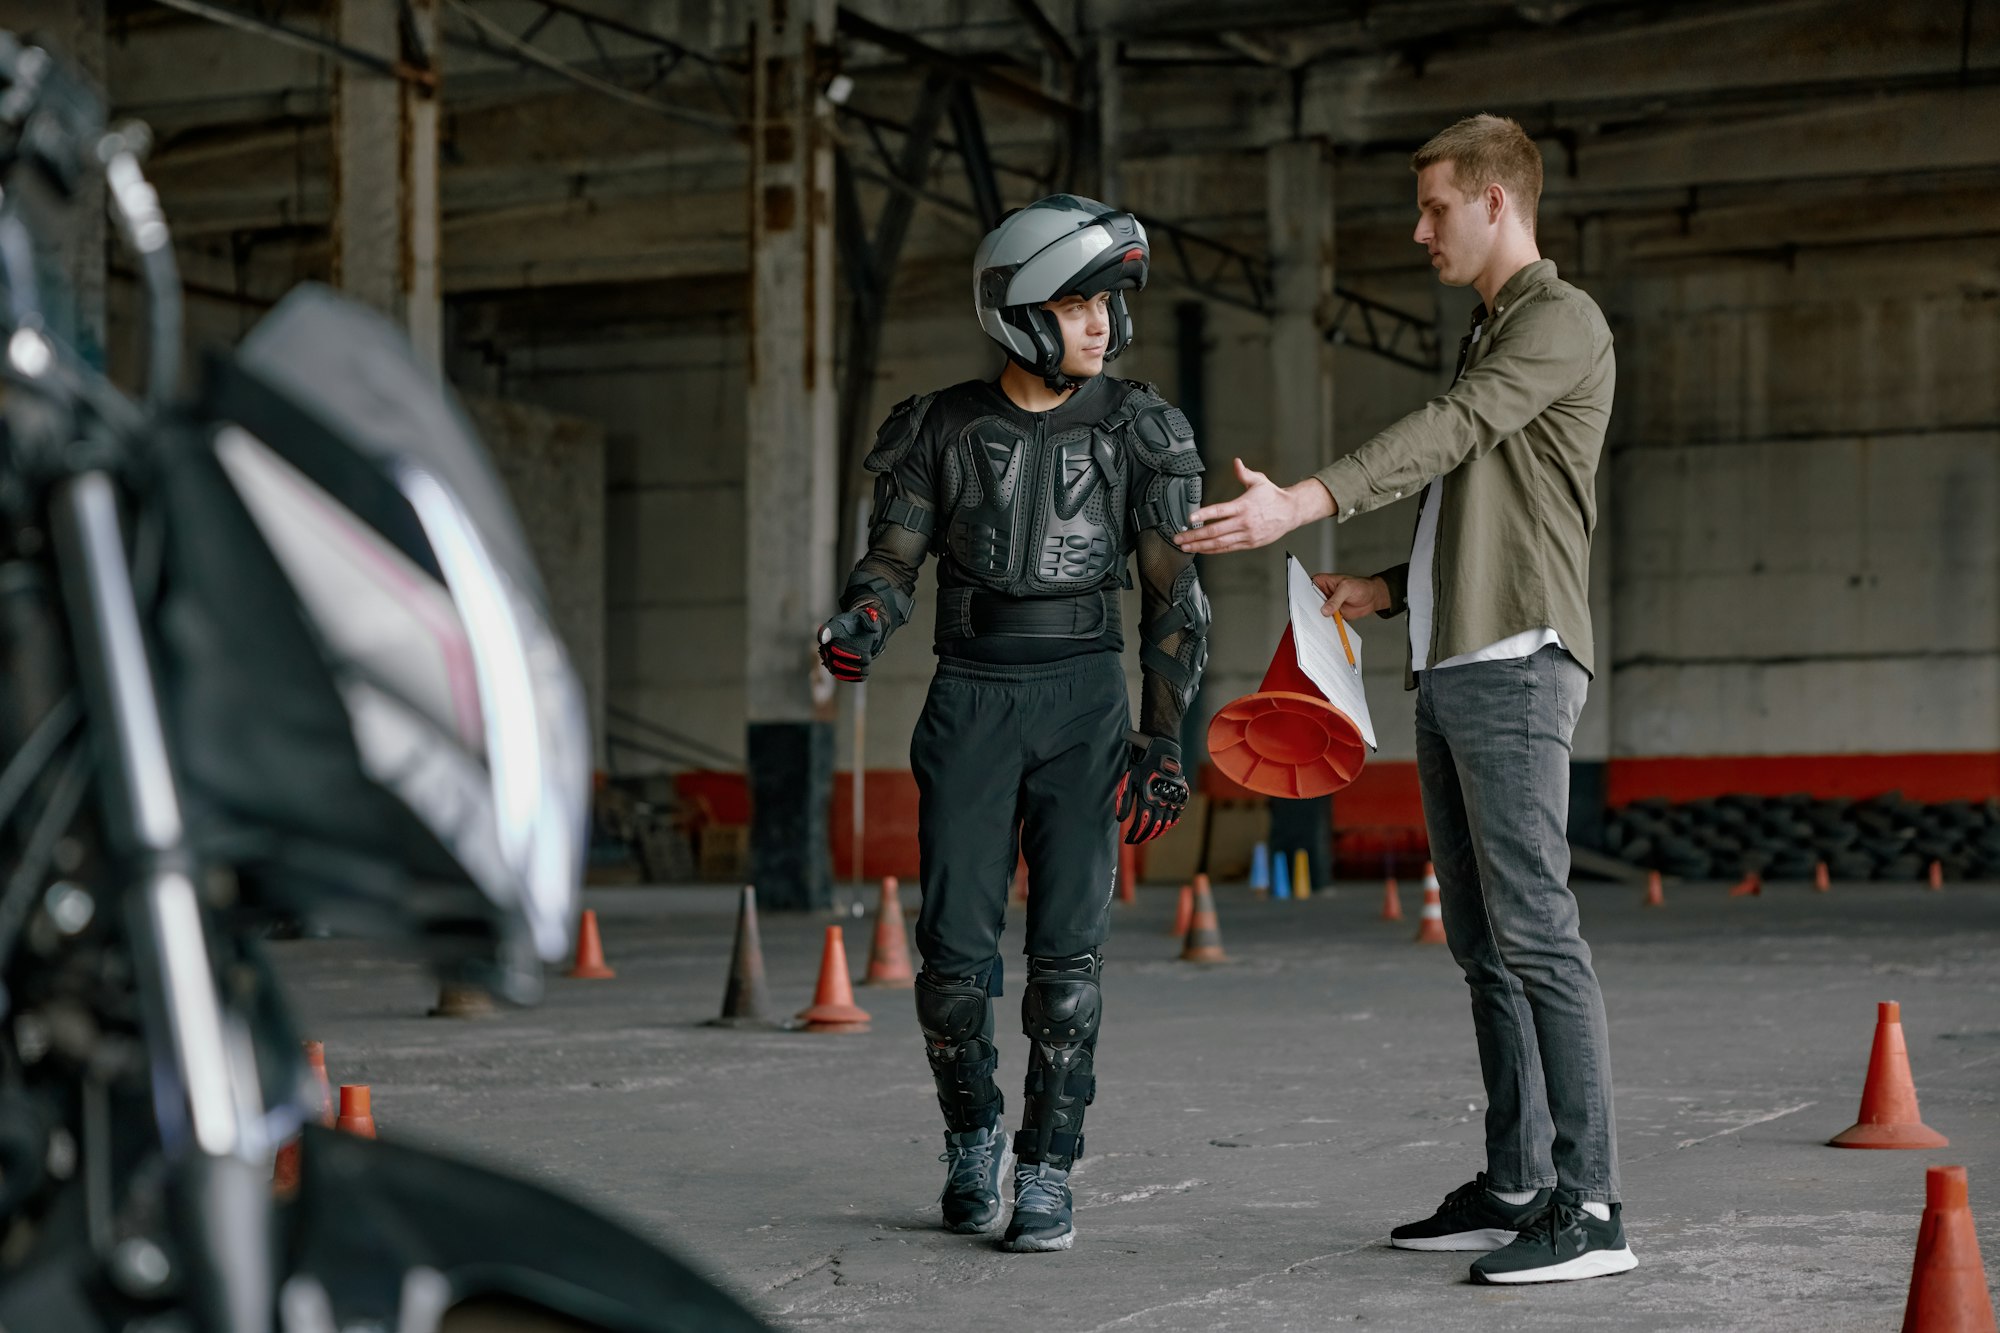 Student motorcyclist and instructor discussing rout of future exam race